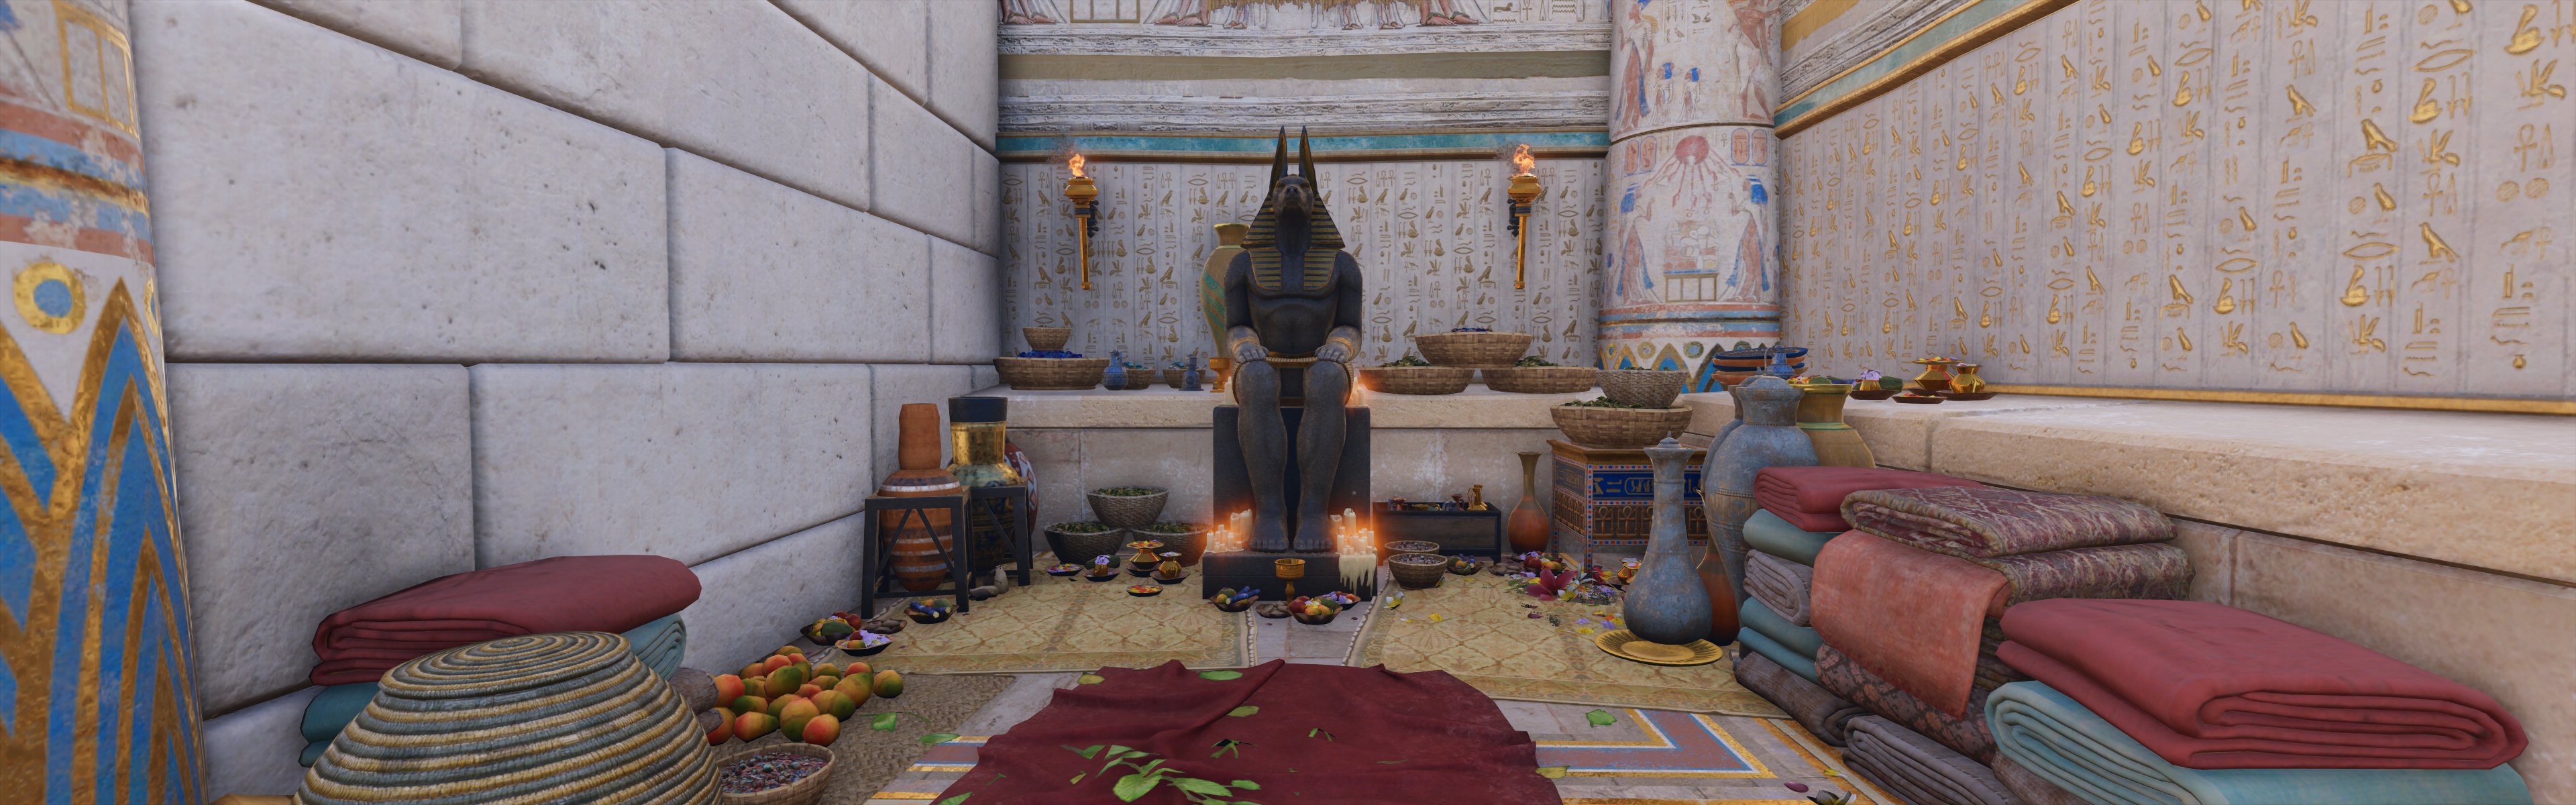 Egypt Pyramid Wide Angle Assassins Creed Origins Video Games CGi Torches Towel Fruit Baskets 3840x1200